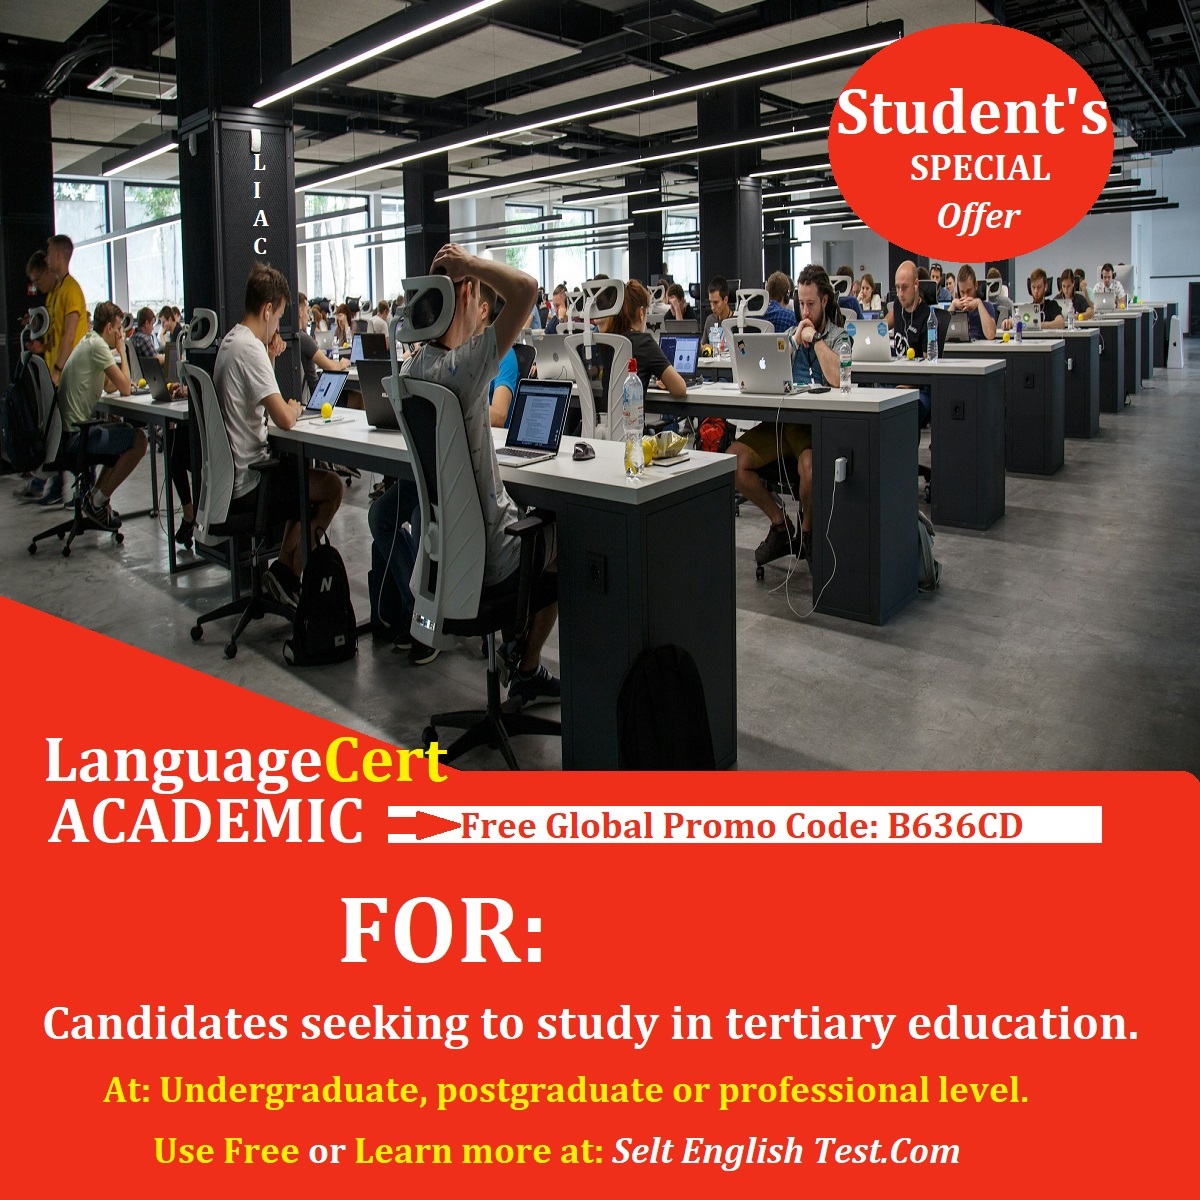 Languagecert Academic From £147.00 With Promo code